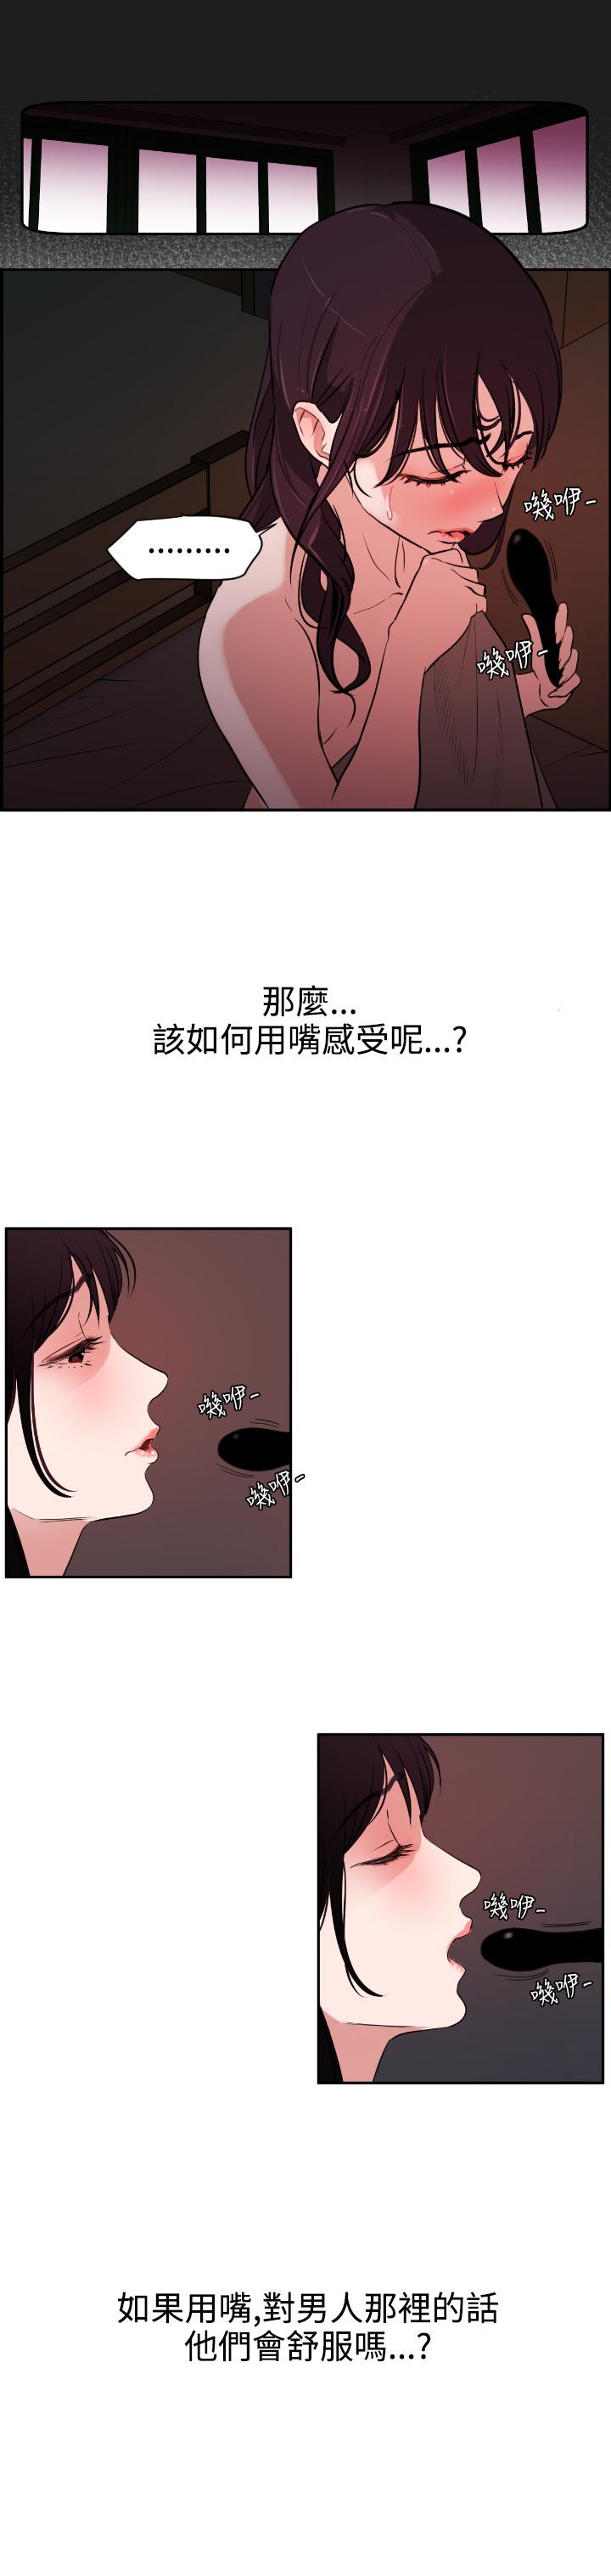 Desire King (慾求王) Ch.1-12 (chinese) 195